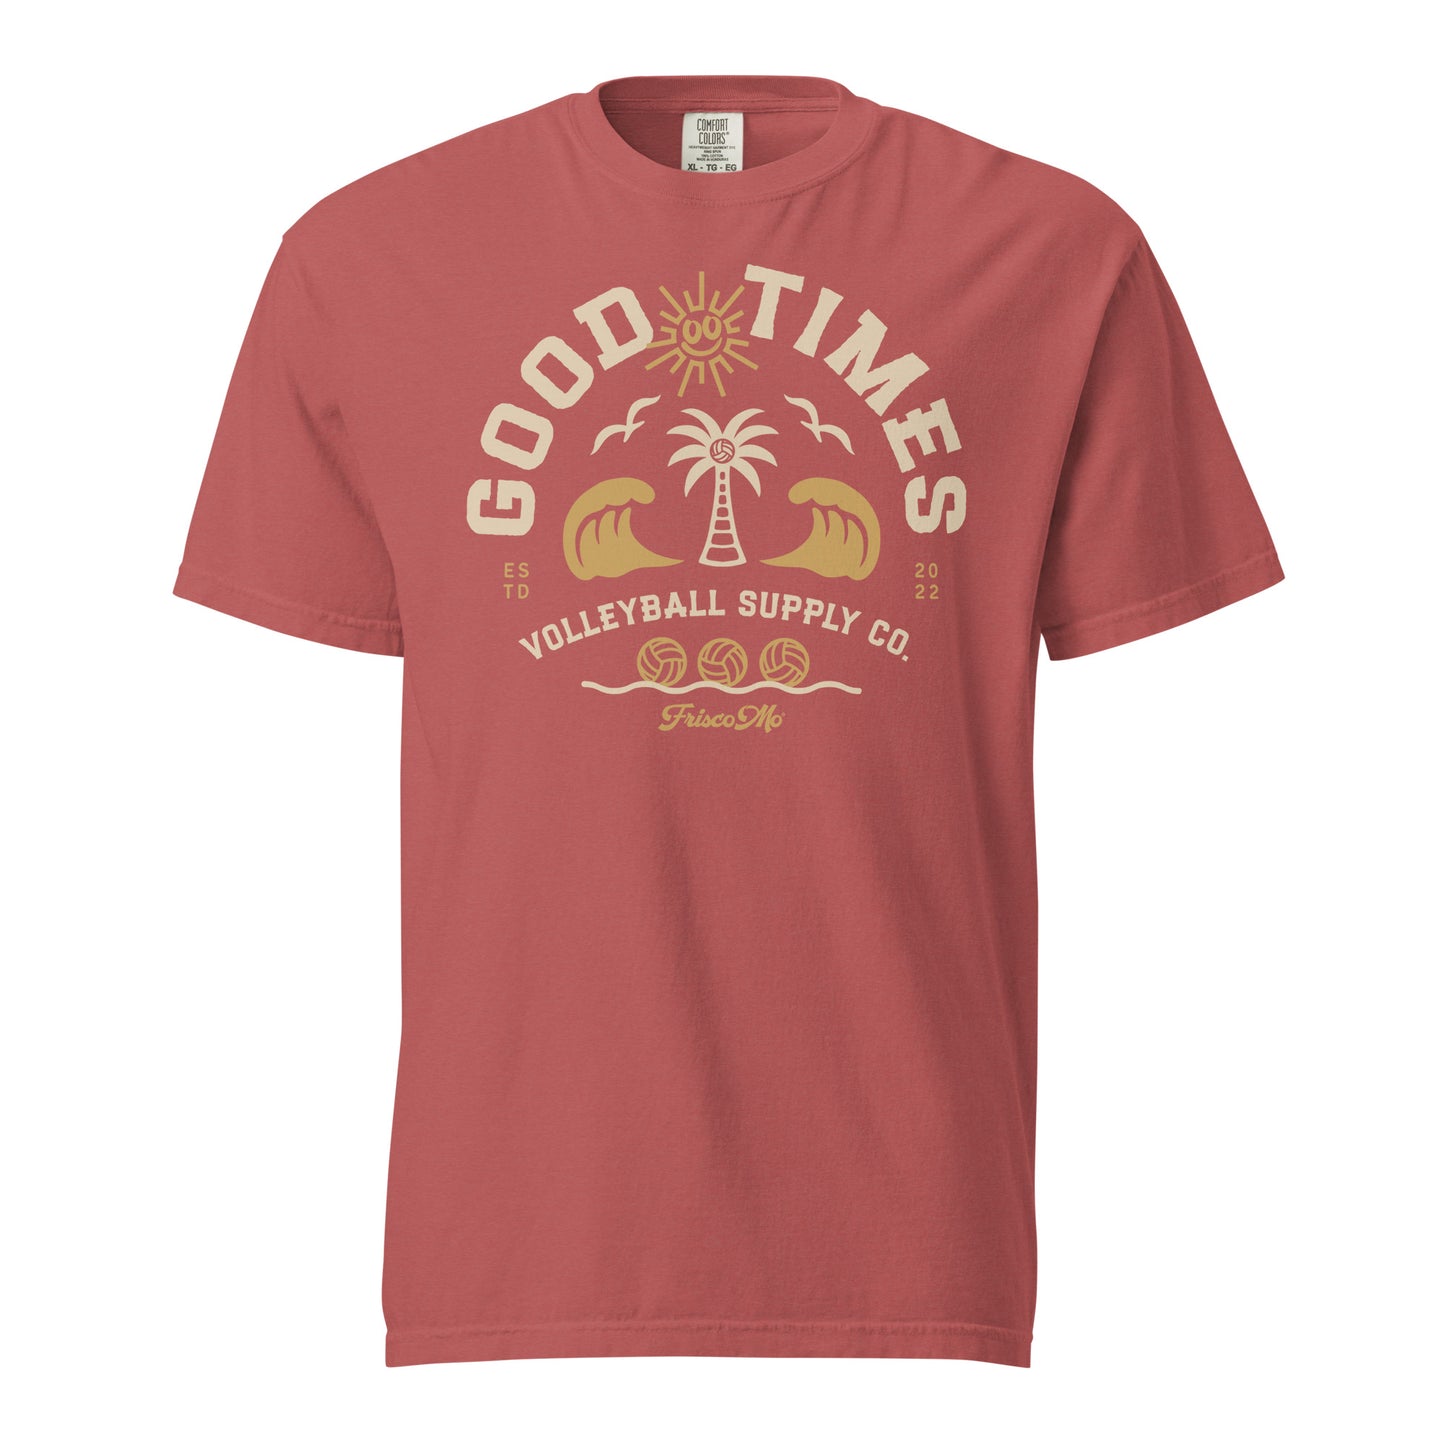 Good Times Volleyball Supply Co. Garment-Dyed Tee